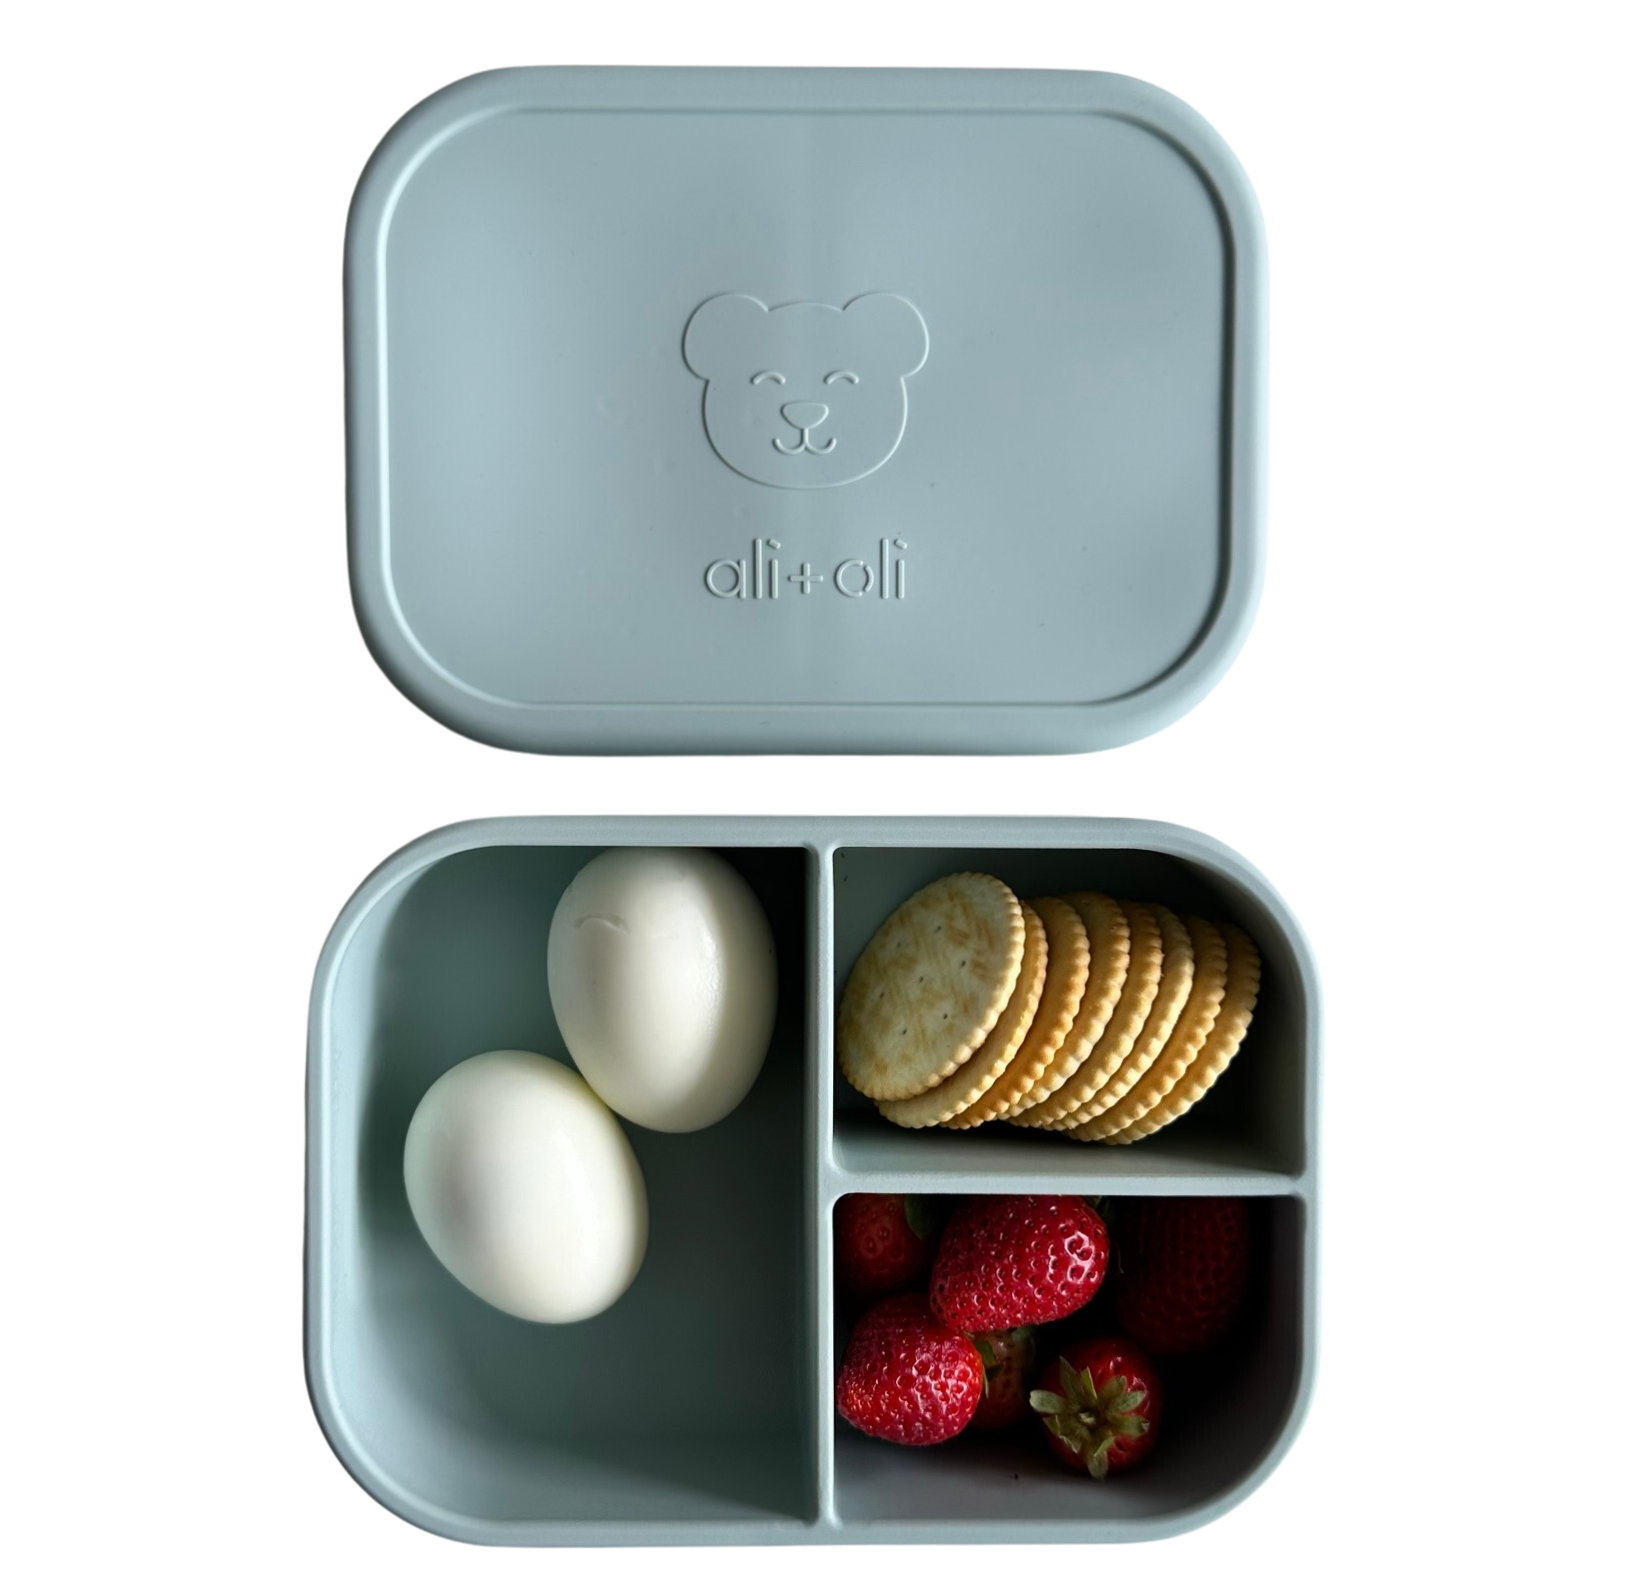 The silicone bento box is a fun and practical solution for packing kids' lunches and making mealtime more enjoyable.